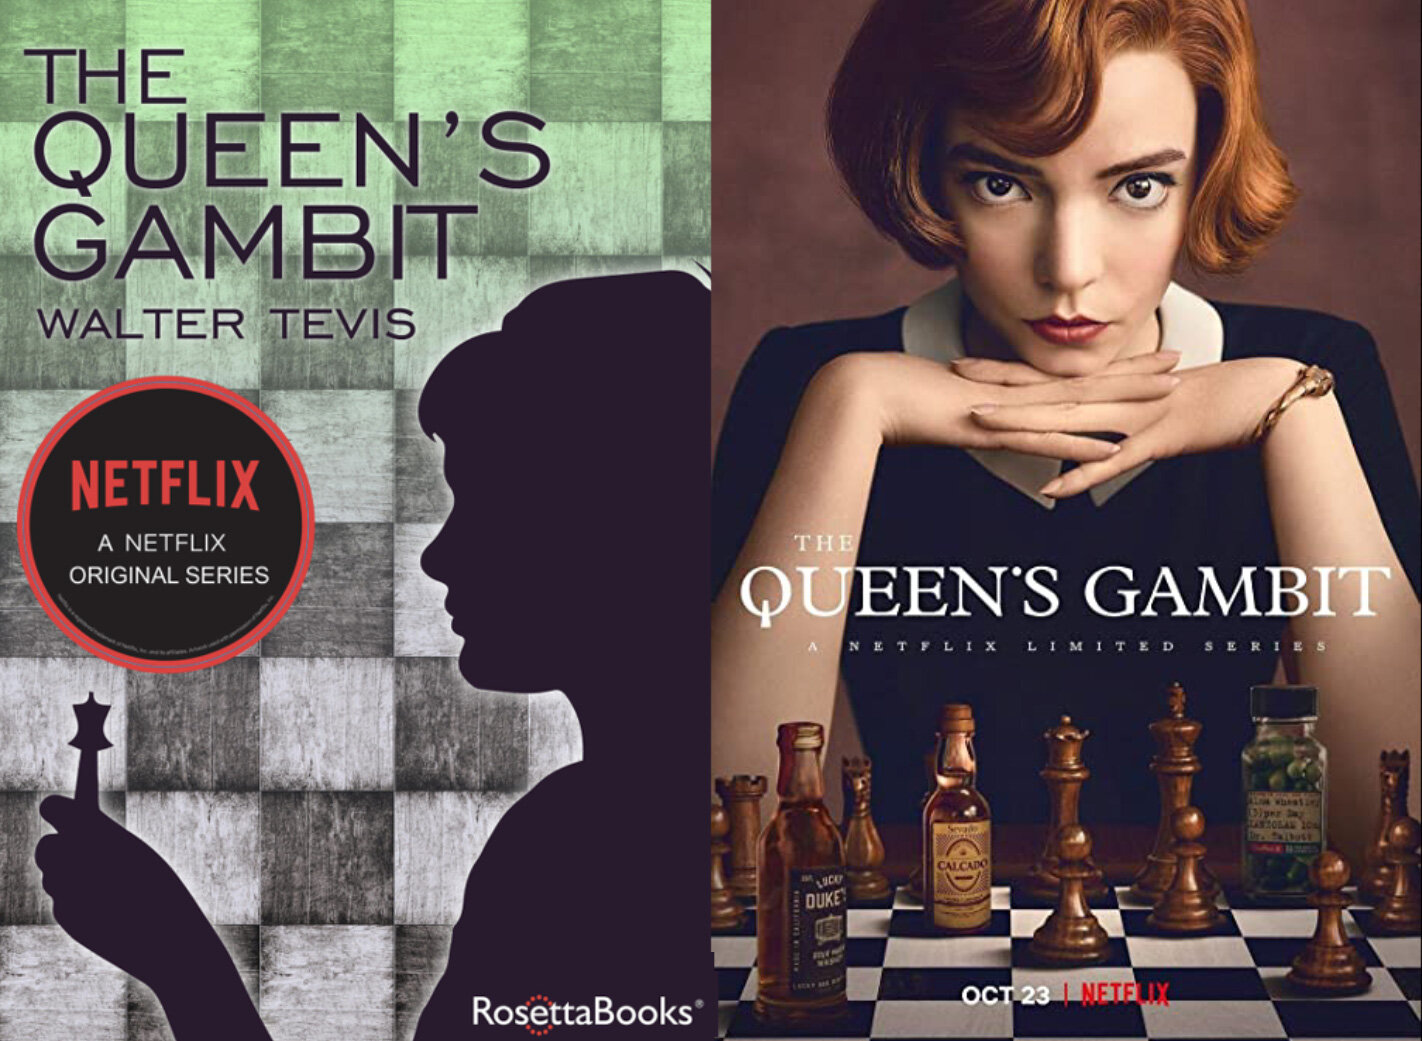 Why The Queen's Gambit — Did They Write It Like That?